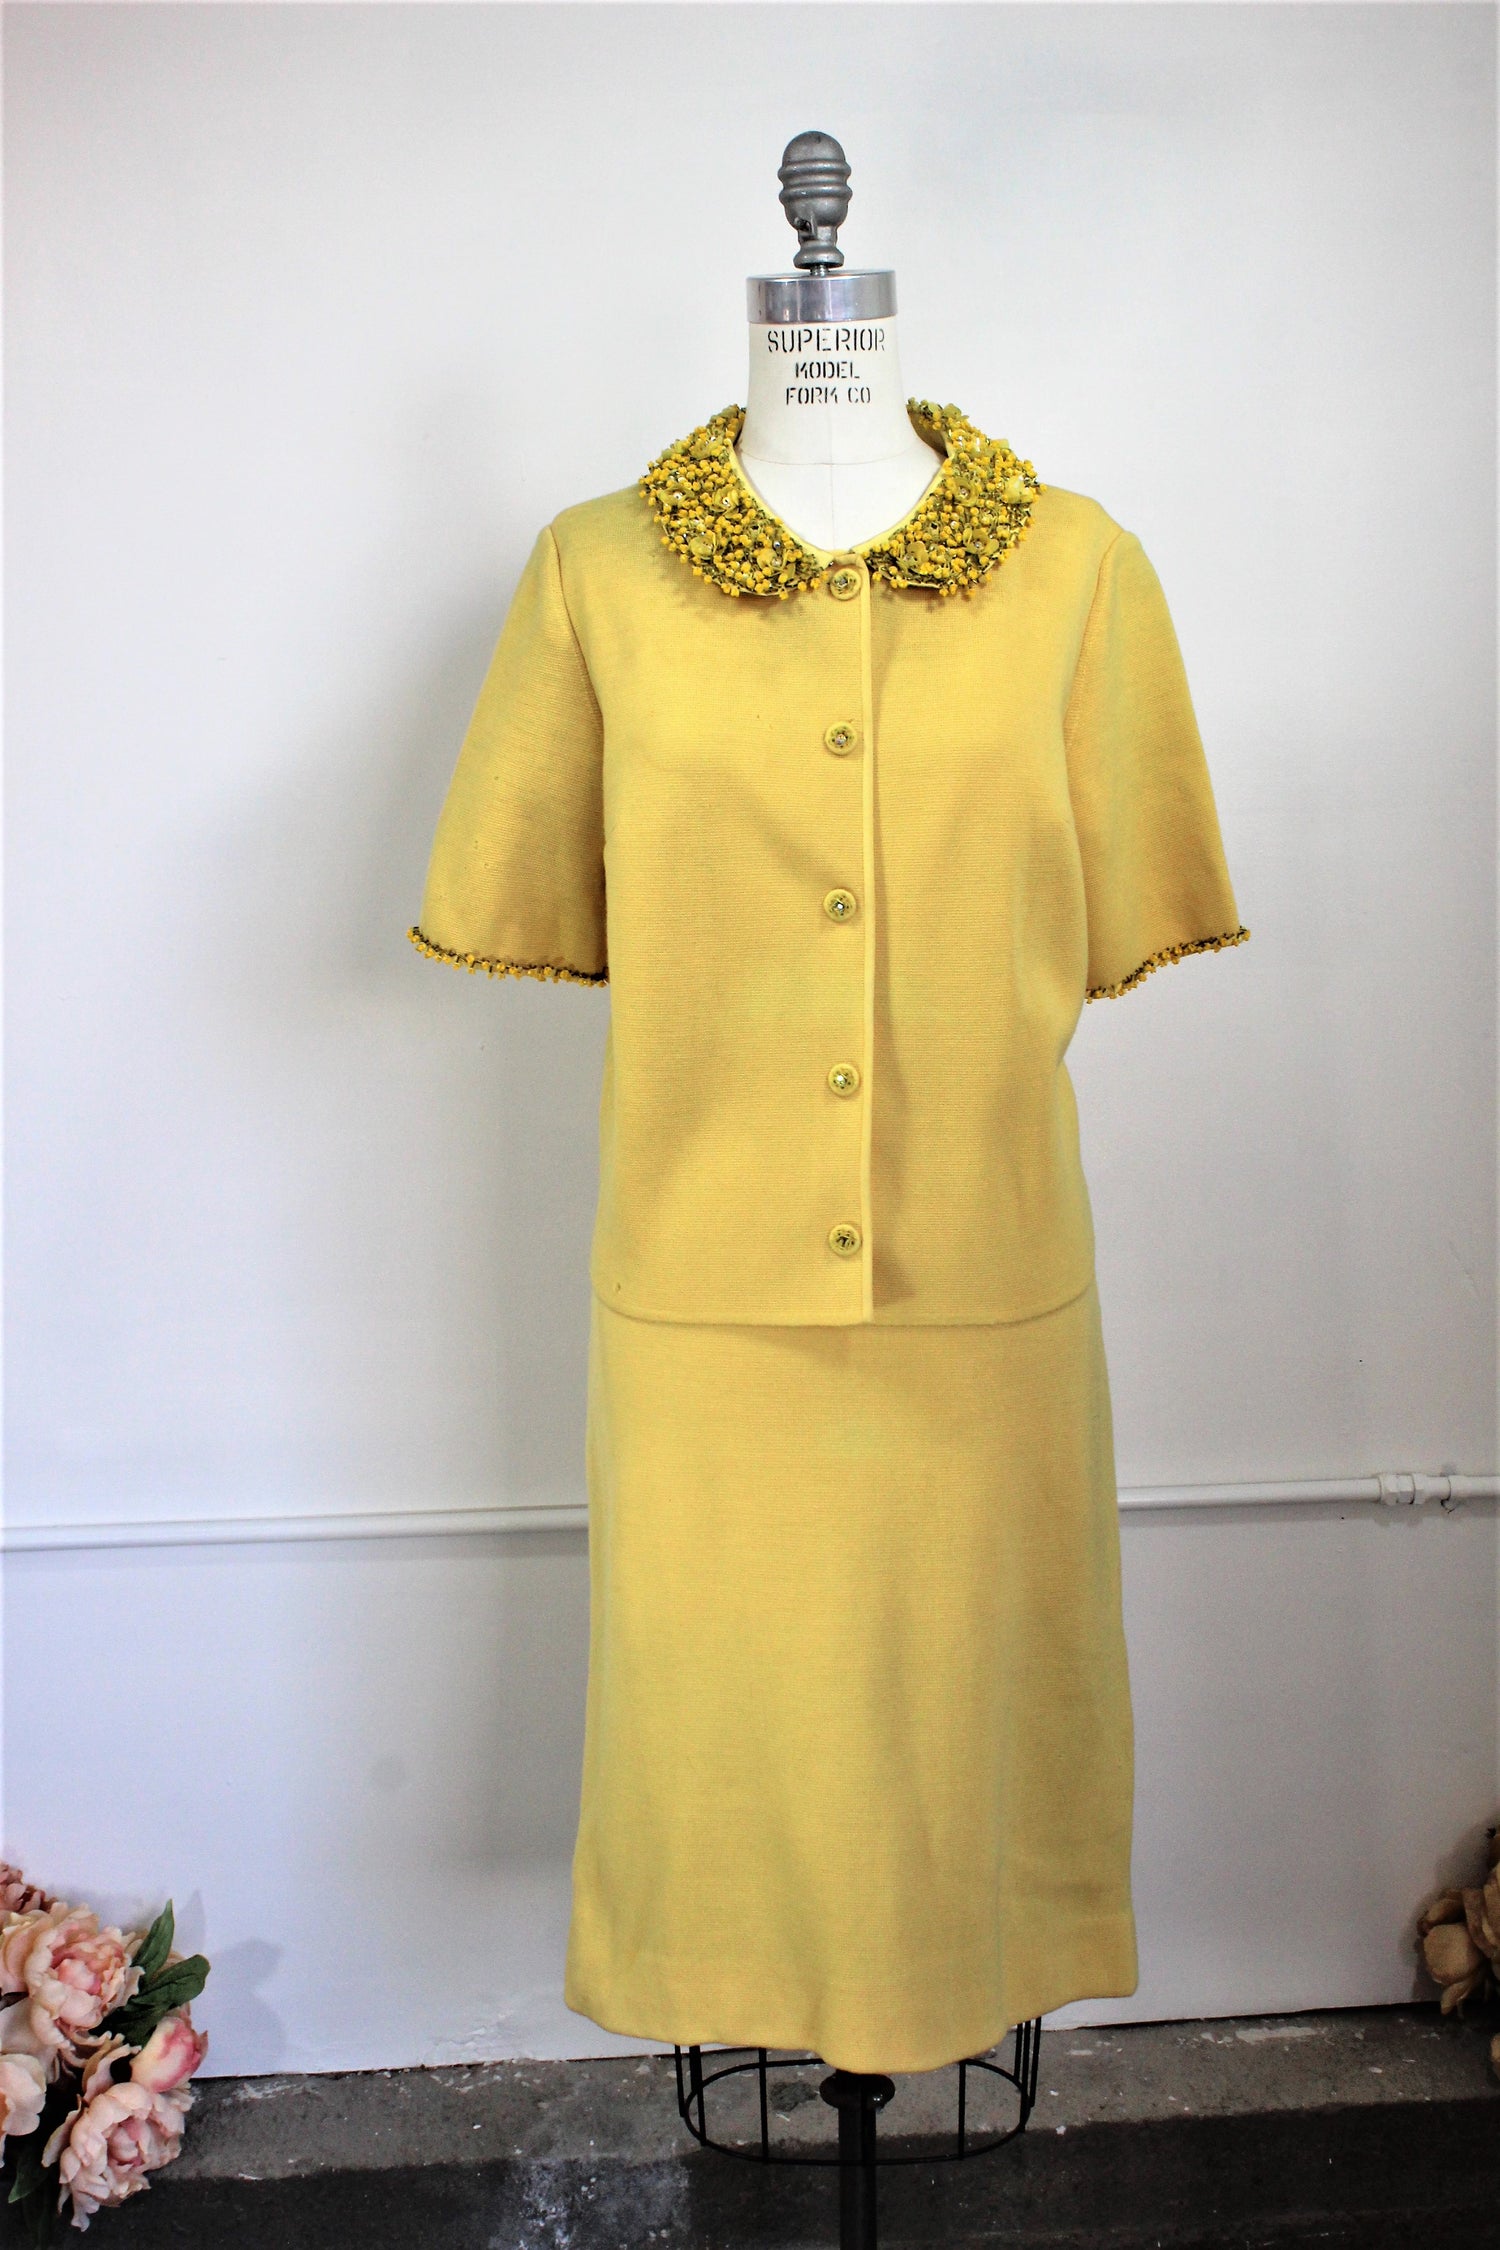 CLEARANCE: Vintage 1960s Yellow Knit Suit With Beaded Collar